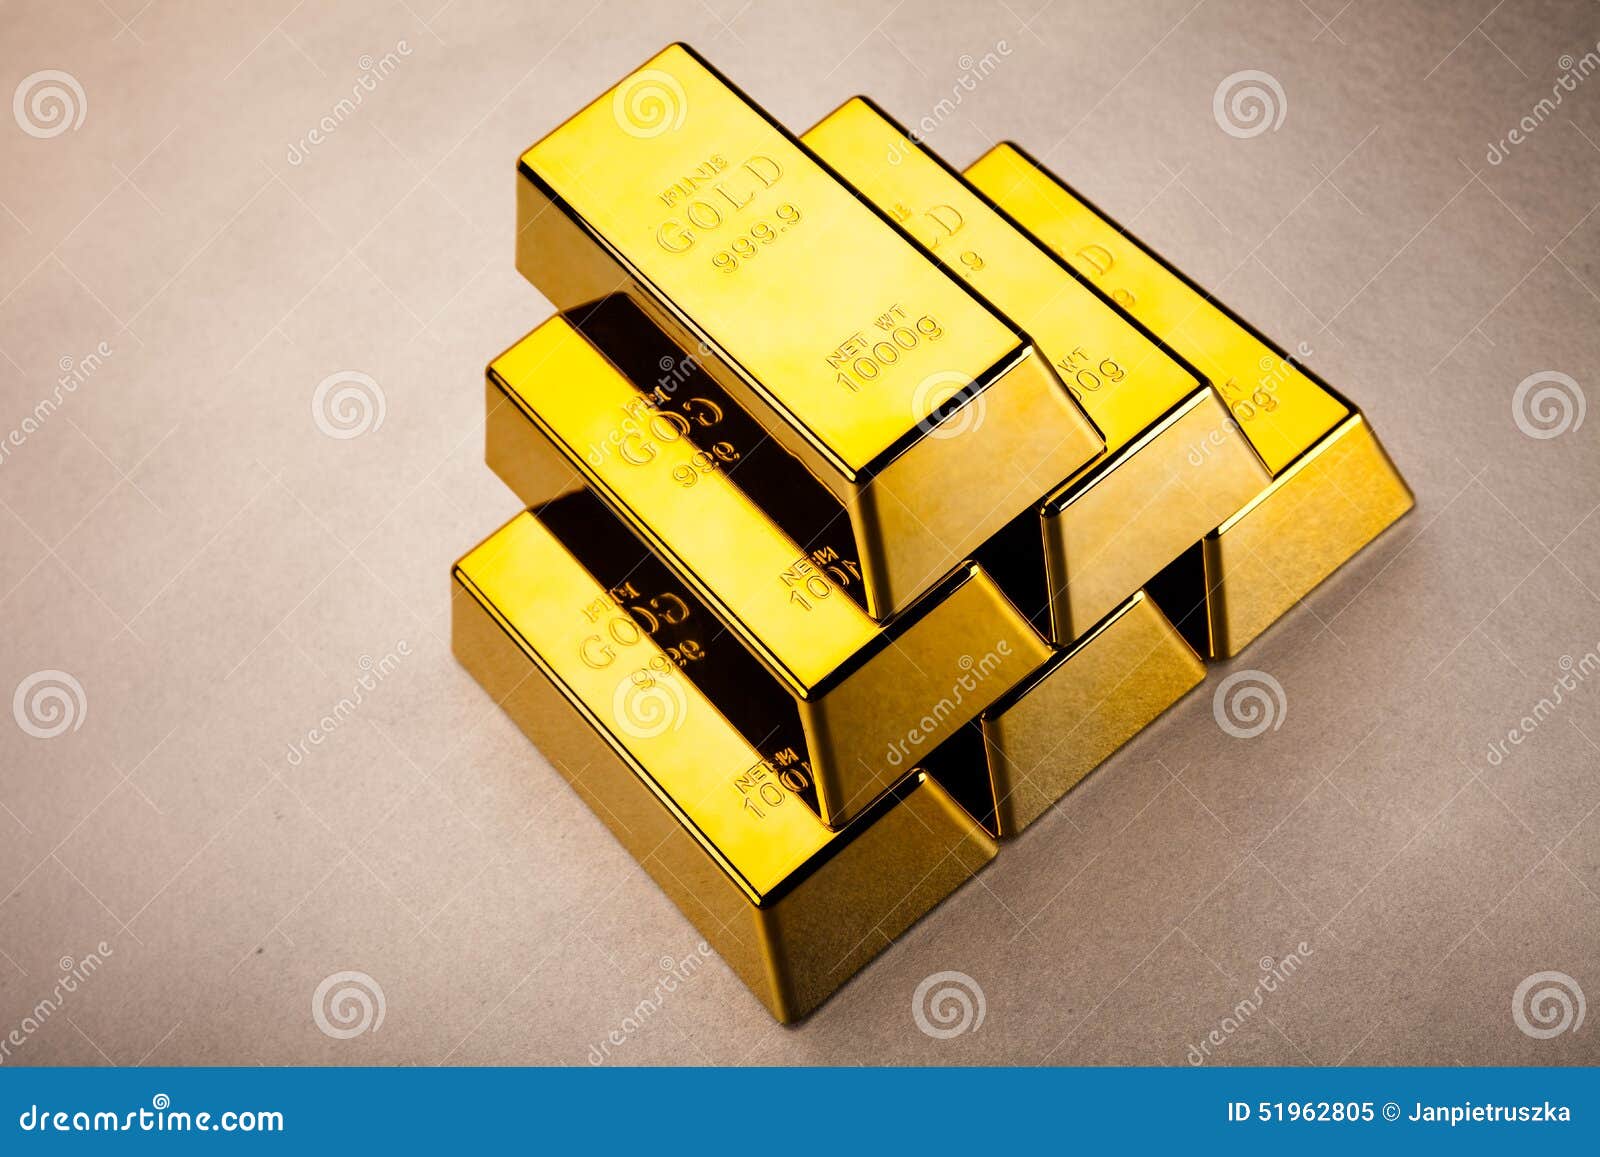 Gold And Money, Ambient Financial Concept Stock Image - Image of pyramid, market: 51962805